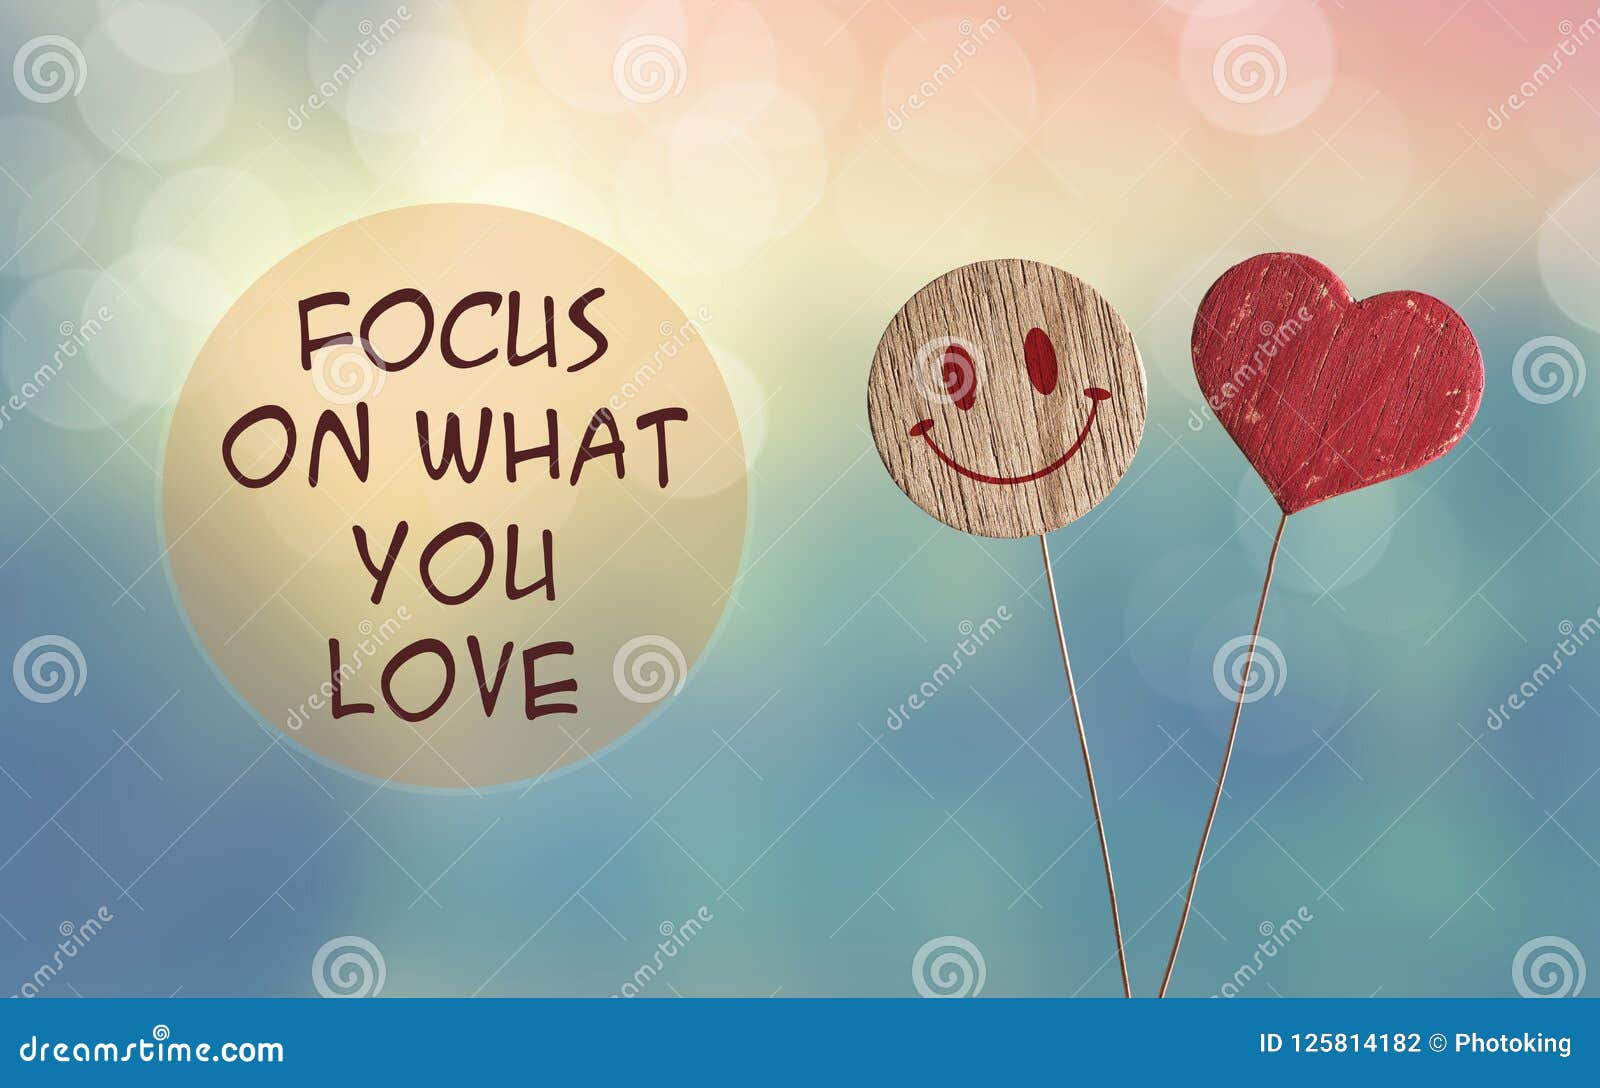 focus on what you love with heart and smile emoji